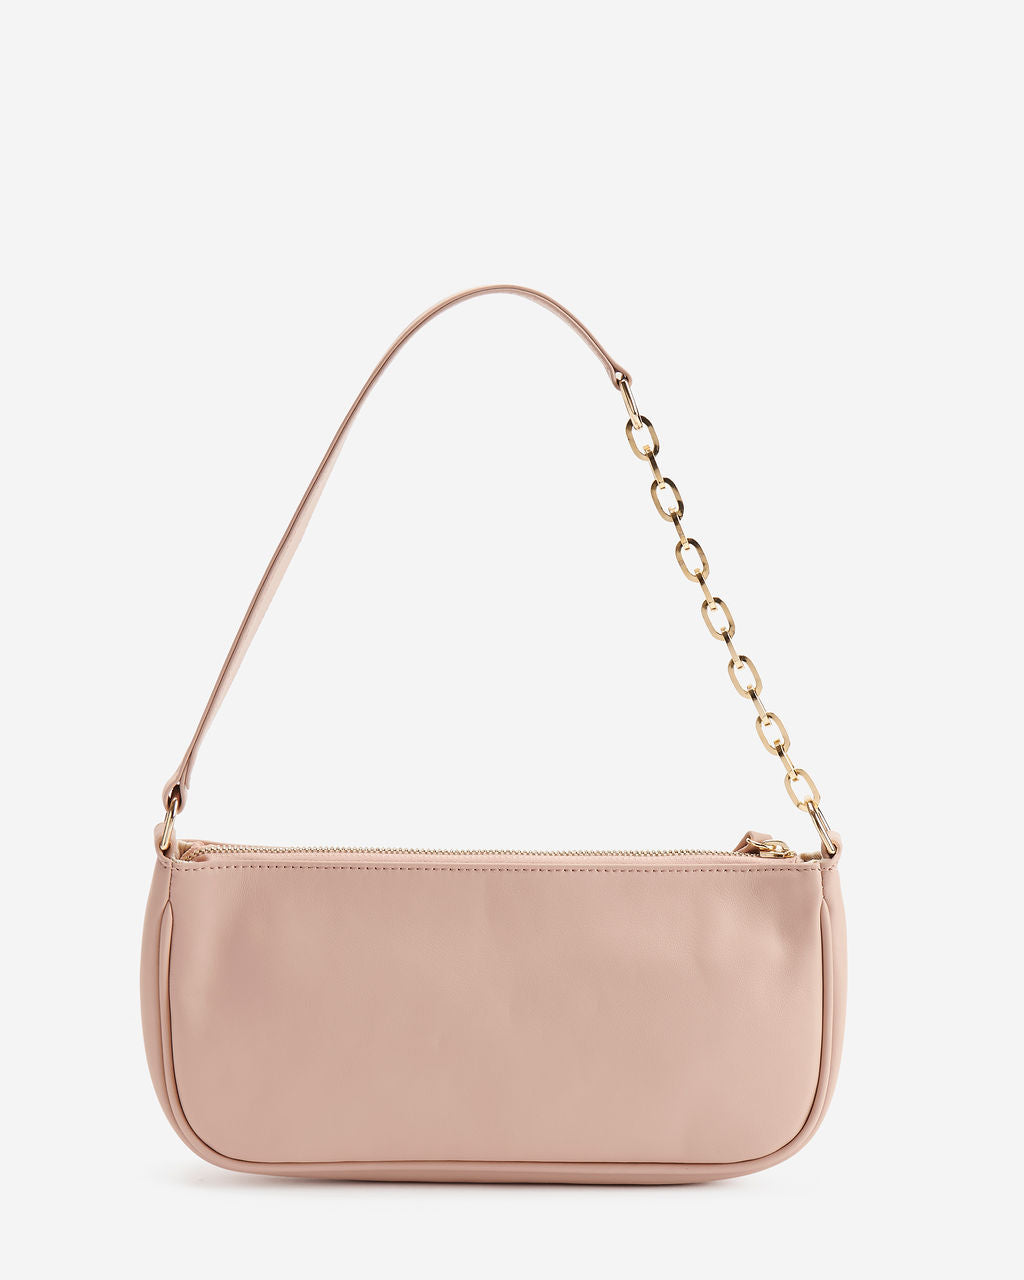 Lucy Bag - Blush  Joey James, The Label   